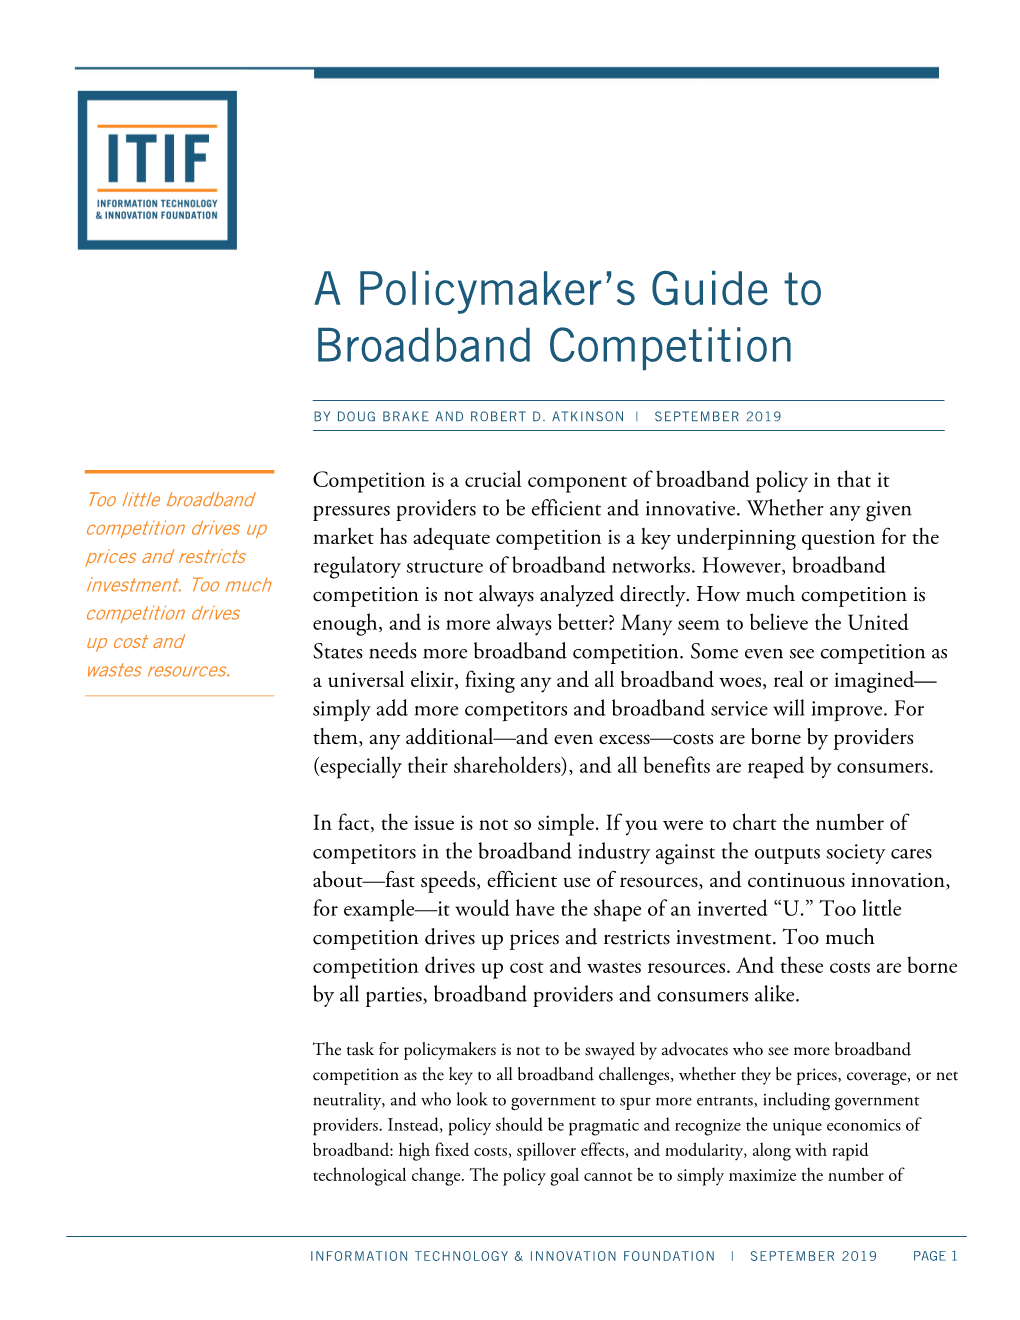 A Policymaker's Guide to Broadband Competition